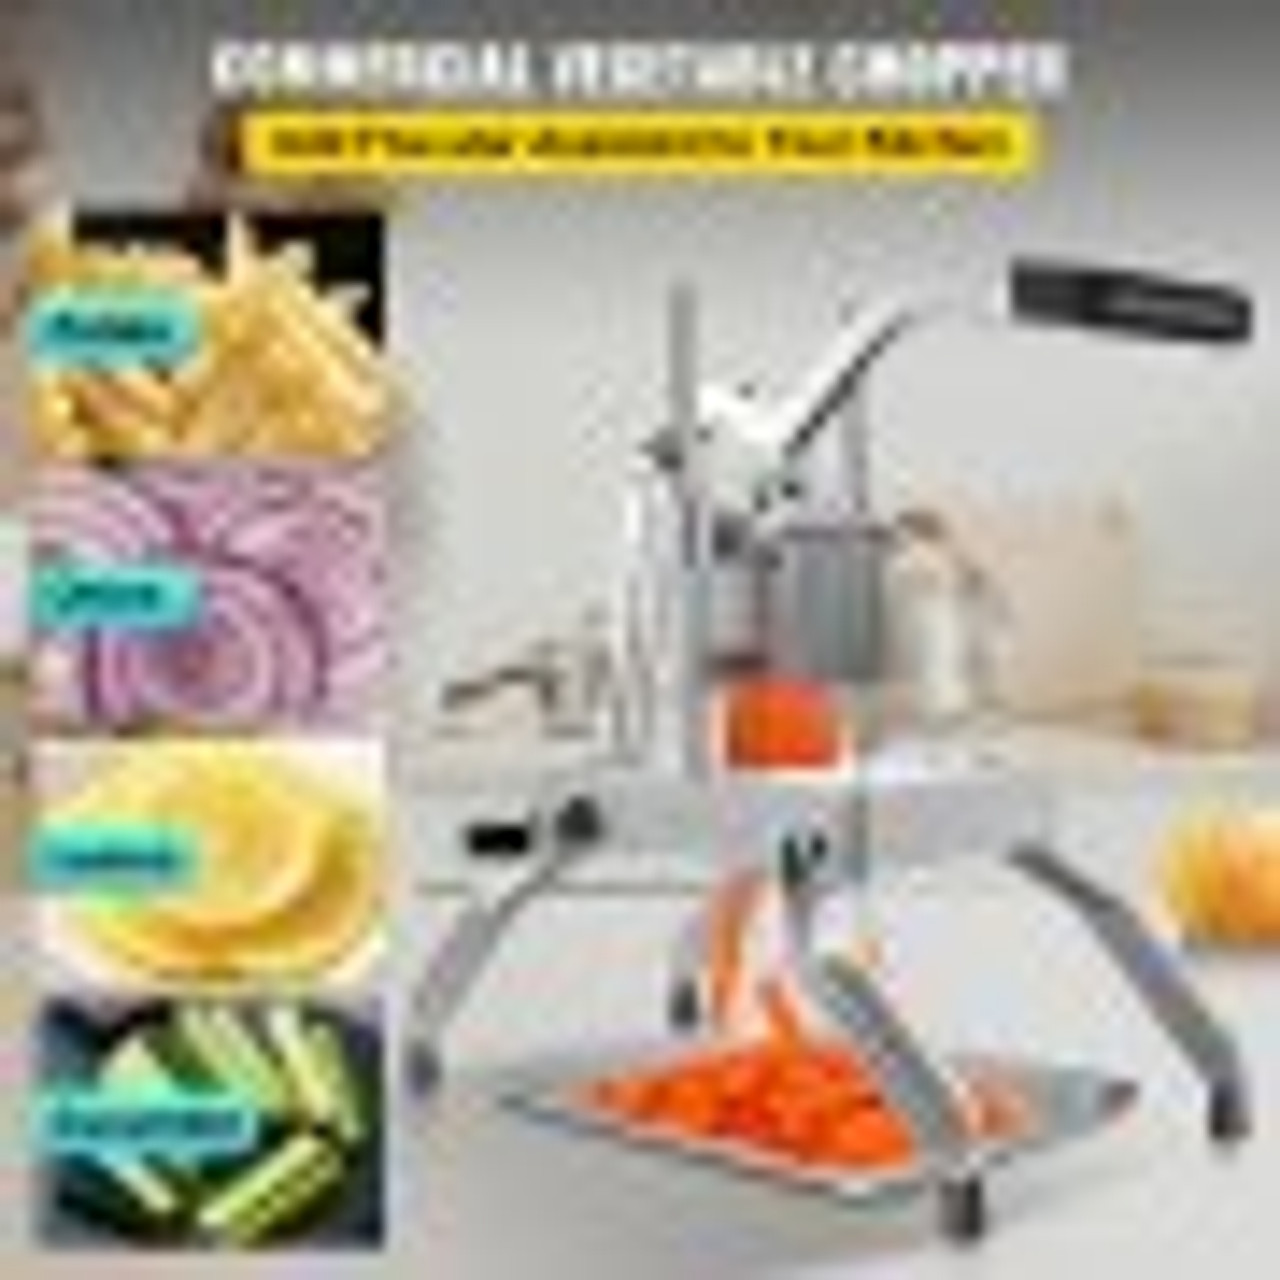 Commercial Vegetable Fruit Dicer 3/16" Blade Onion Cutter Heavy Duty Stainless Steel Removable and Replaceable Kattex Chopper Tomato Slicer with Tray Perfect for Pepper Potato Mushroom